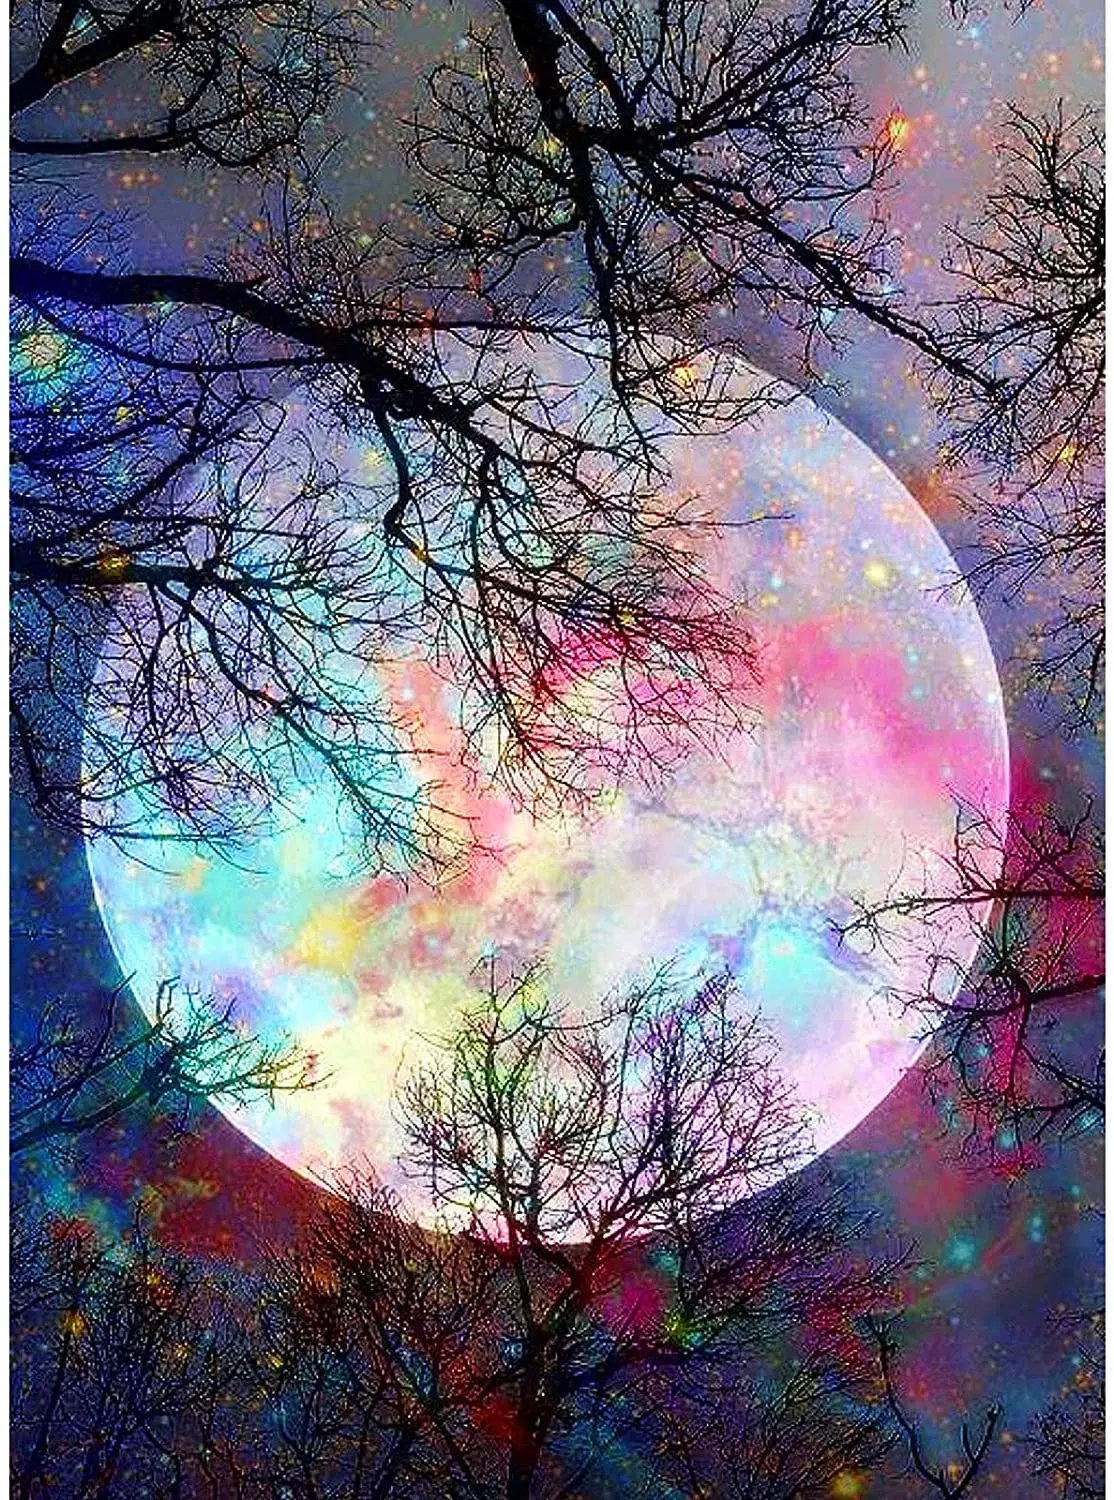 

DIY 5D Diamond Painting Moon By Number Kits Bright Moon Full Drill Diamond Art Embroidery Picture Arts Craft Wall Decor 12x16in